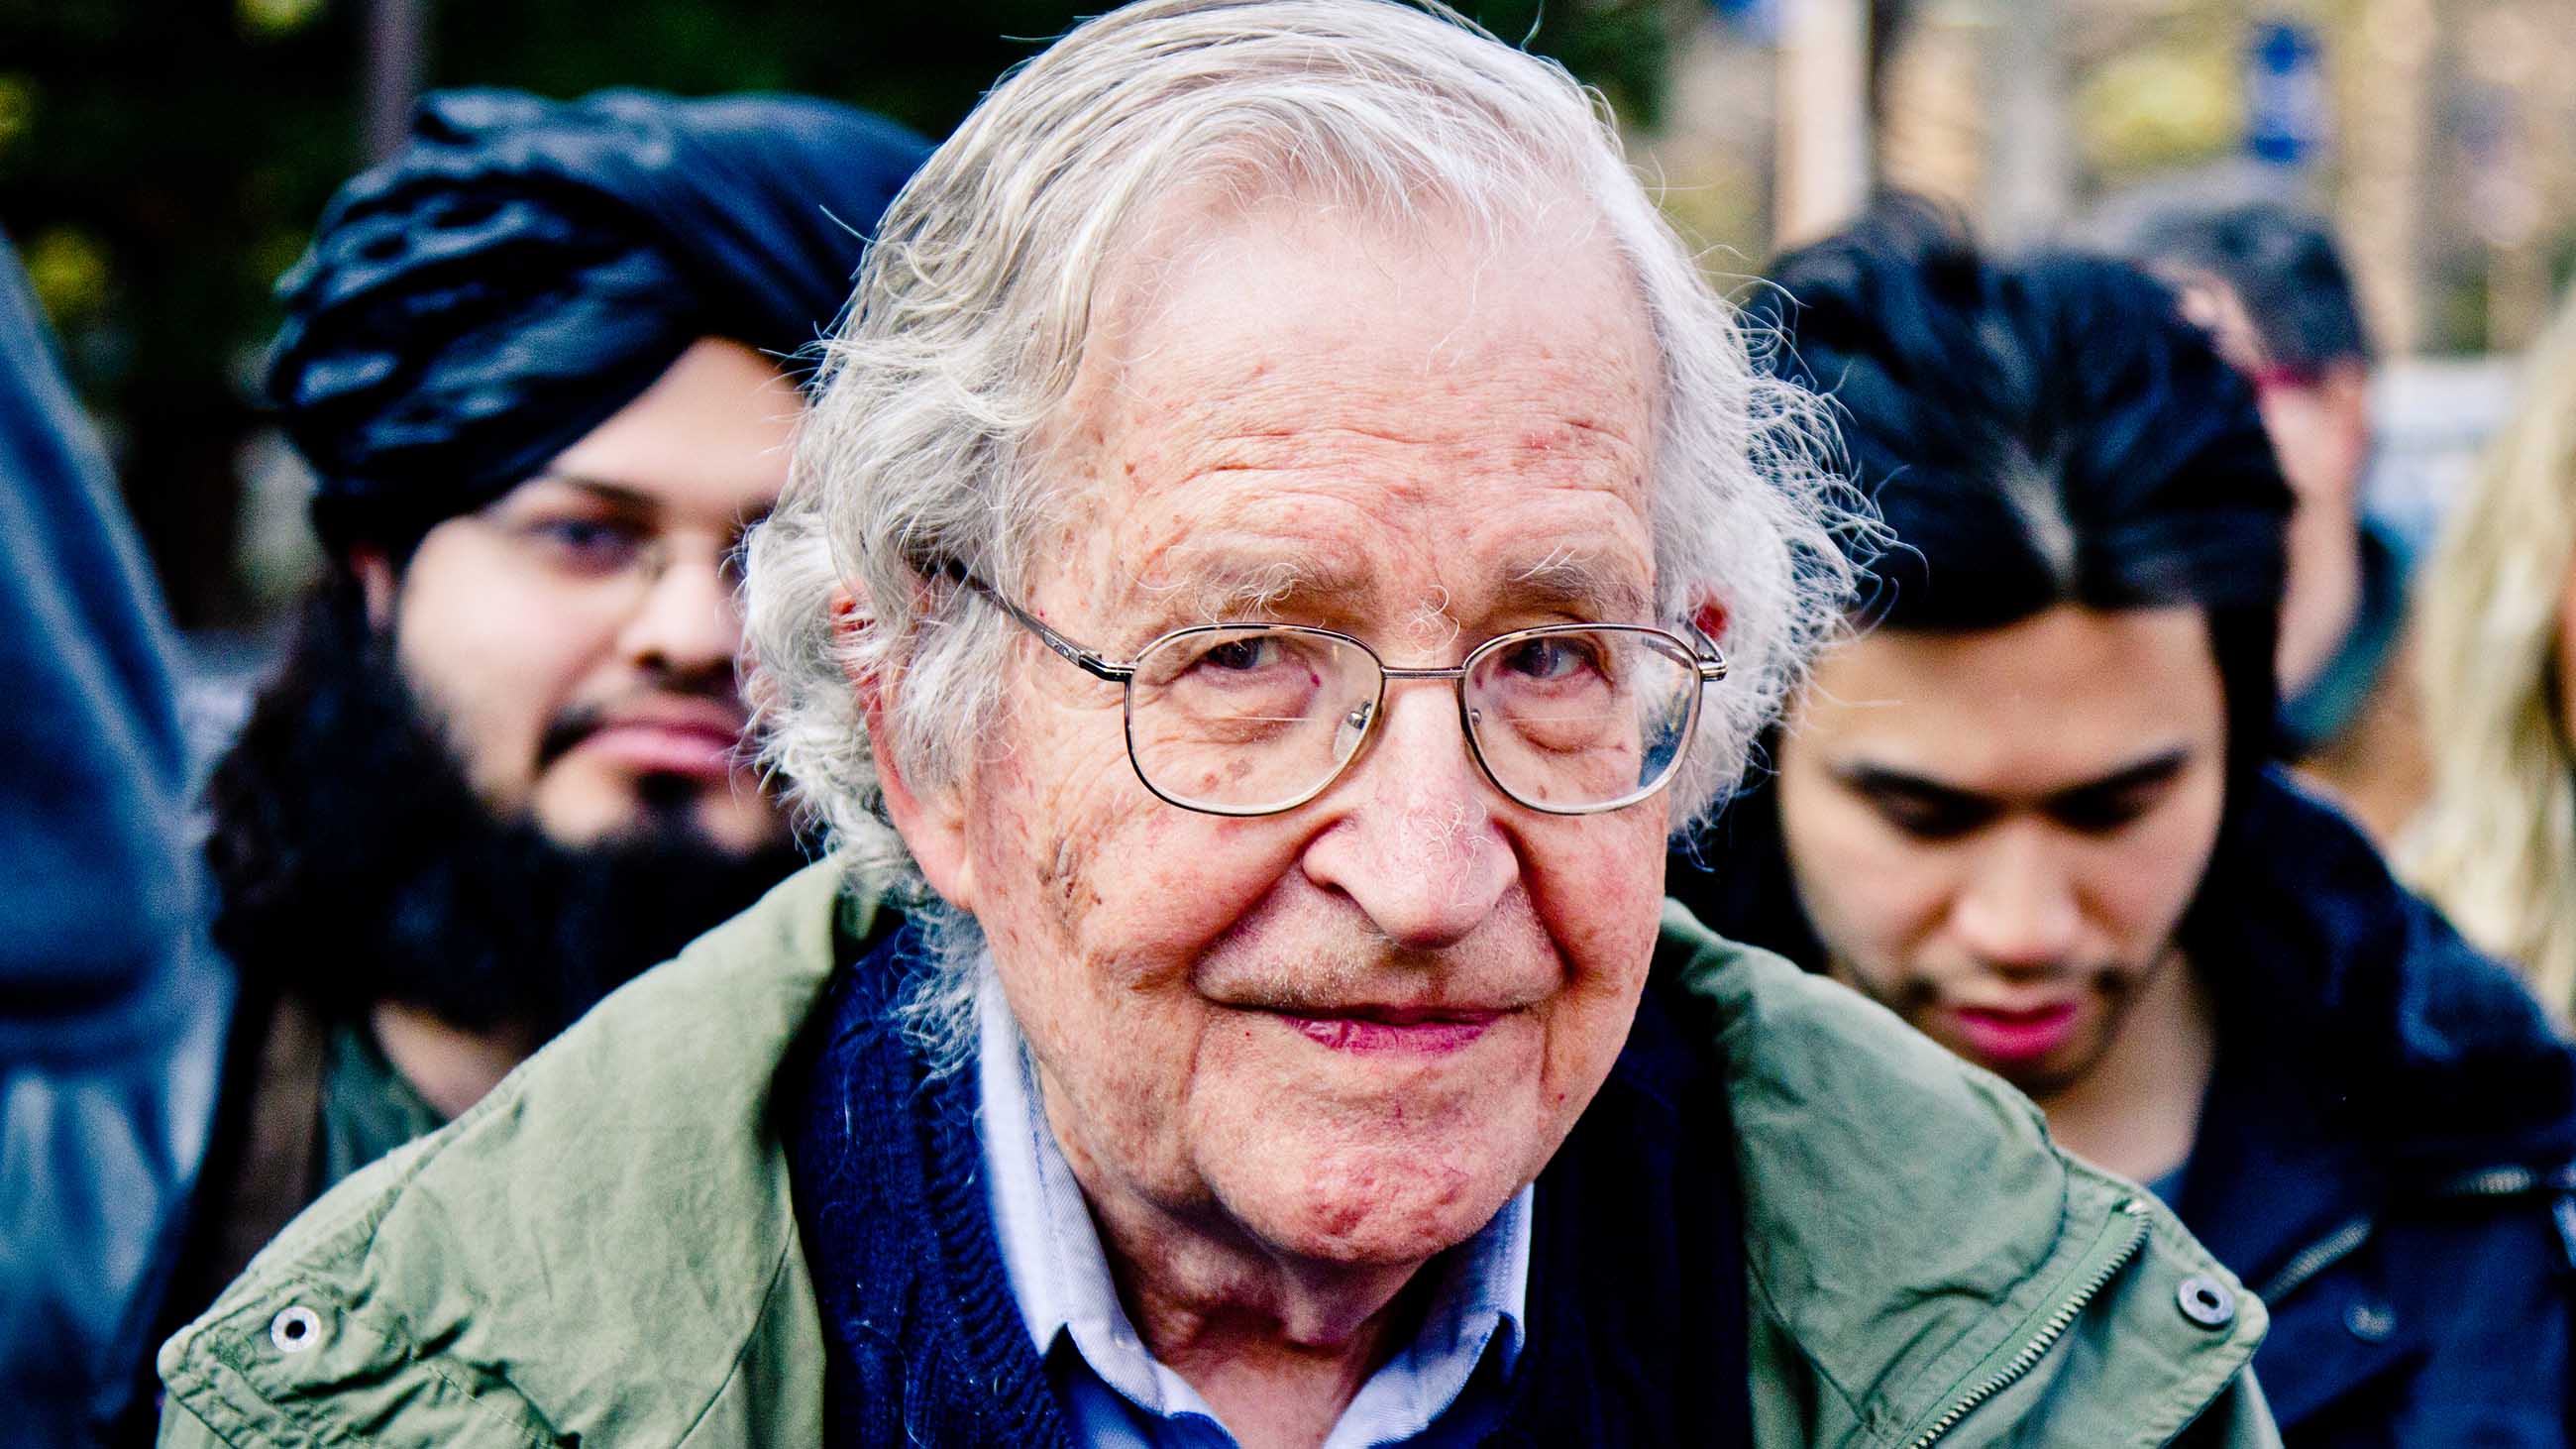 The MIT linguist and political philosopher Noam Chomsky was among those who predicted the rise of a figure like Donald Trump. So we asked him a few questions.